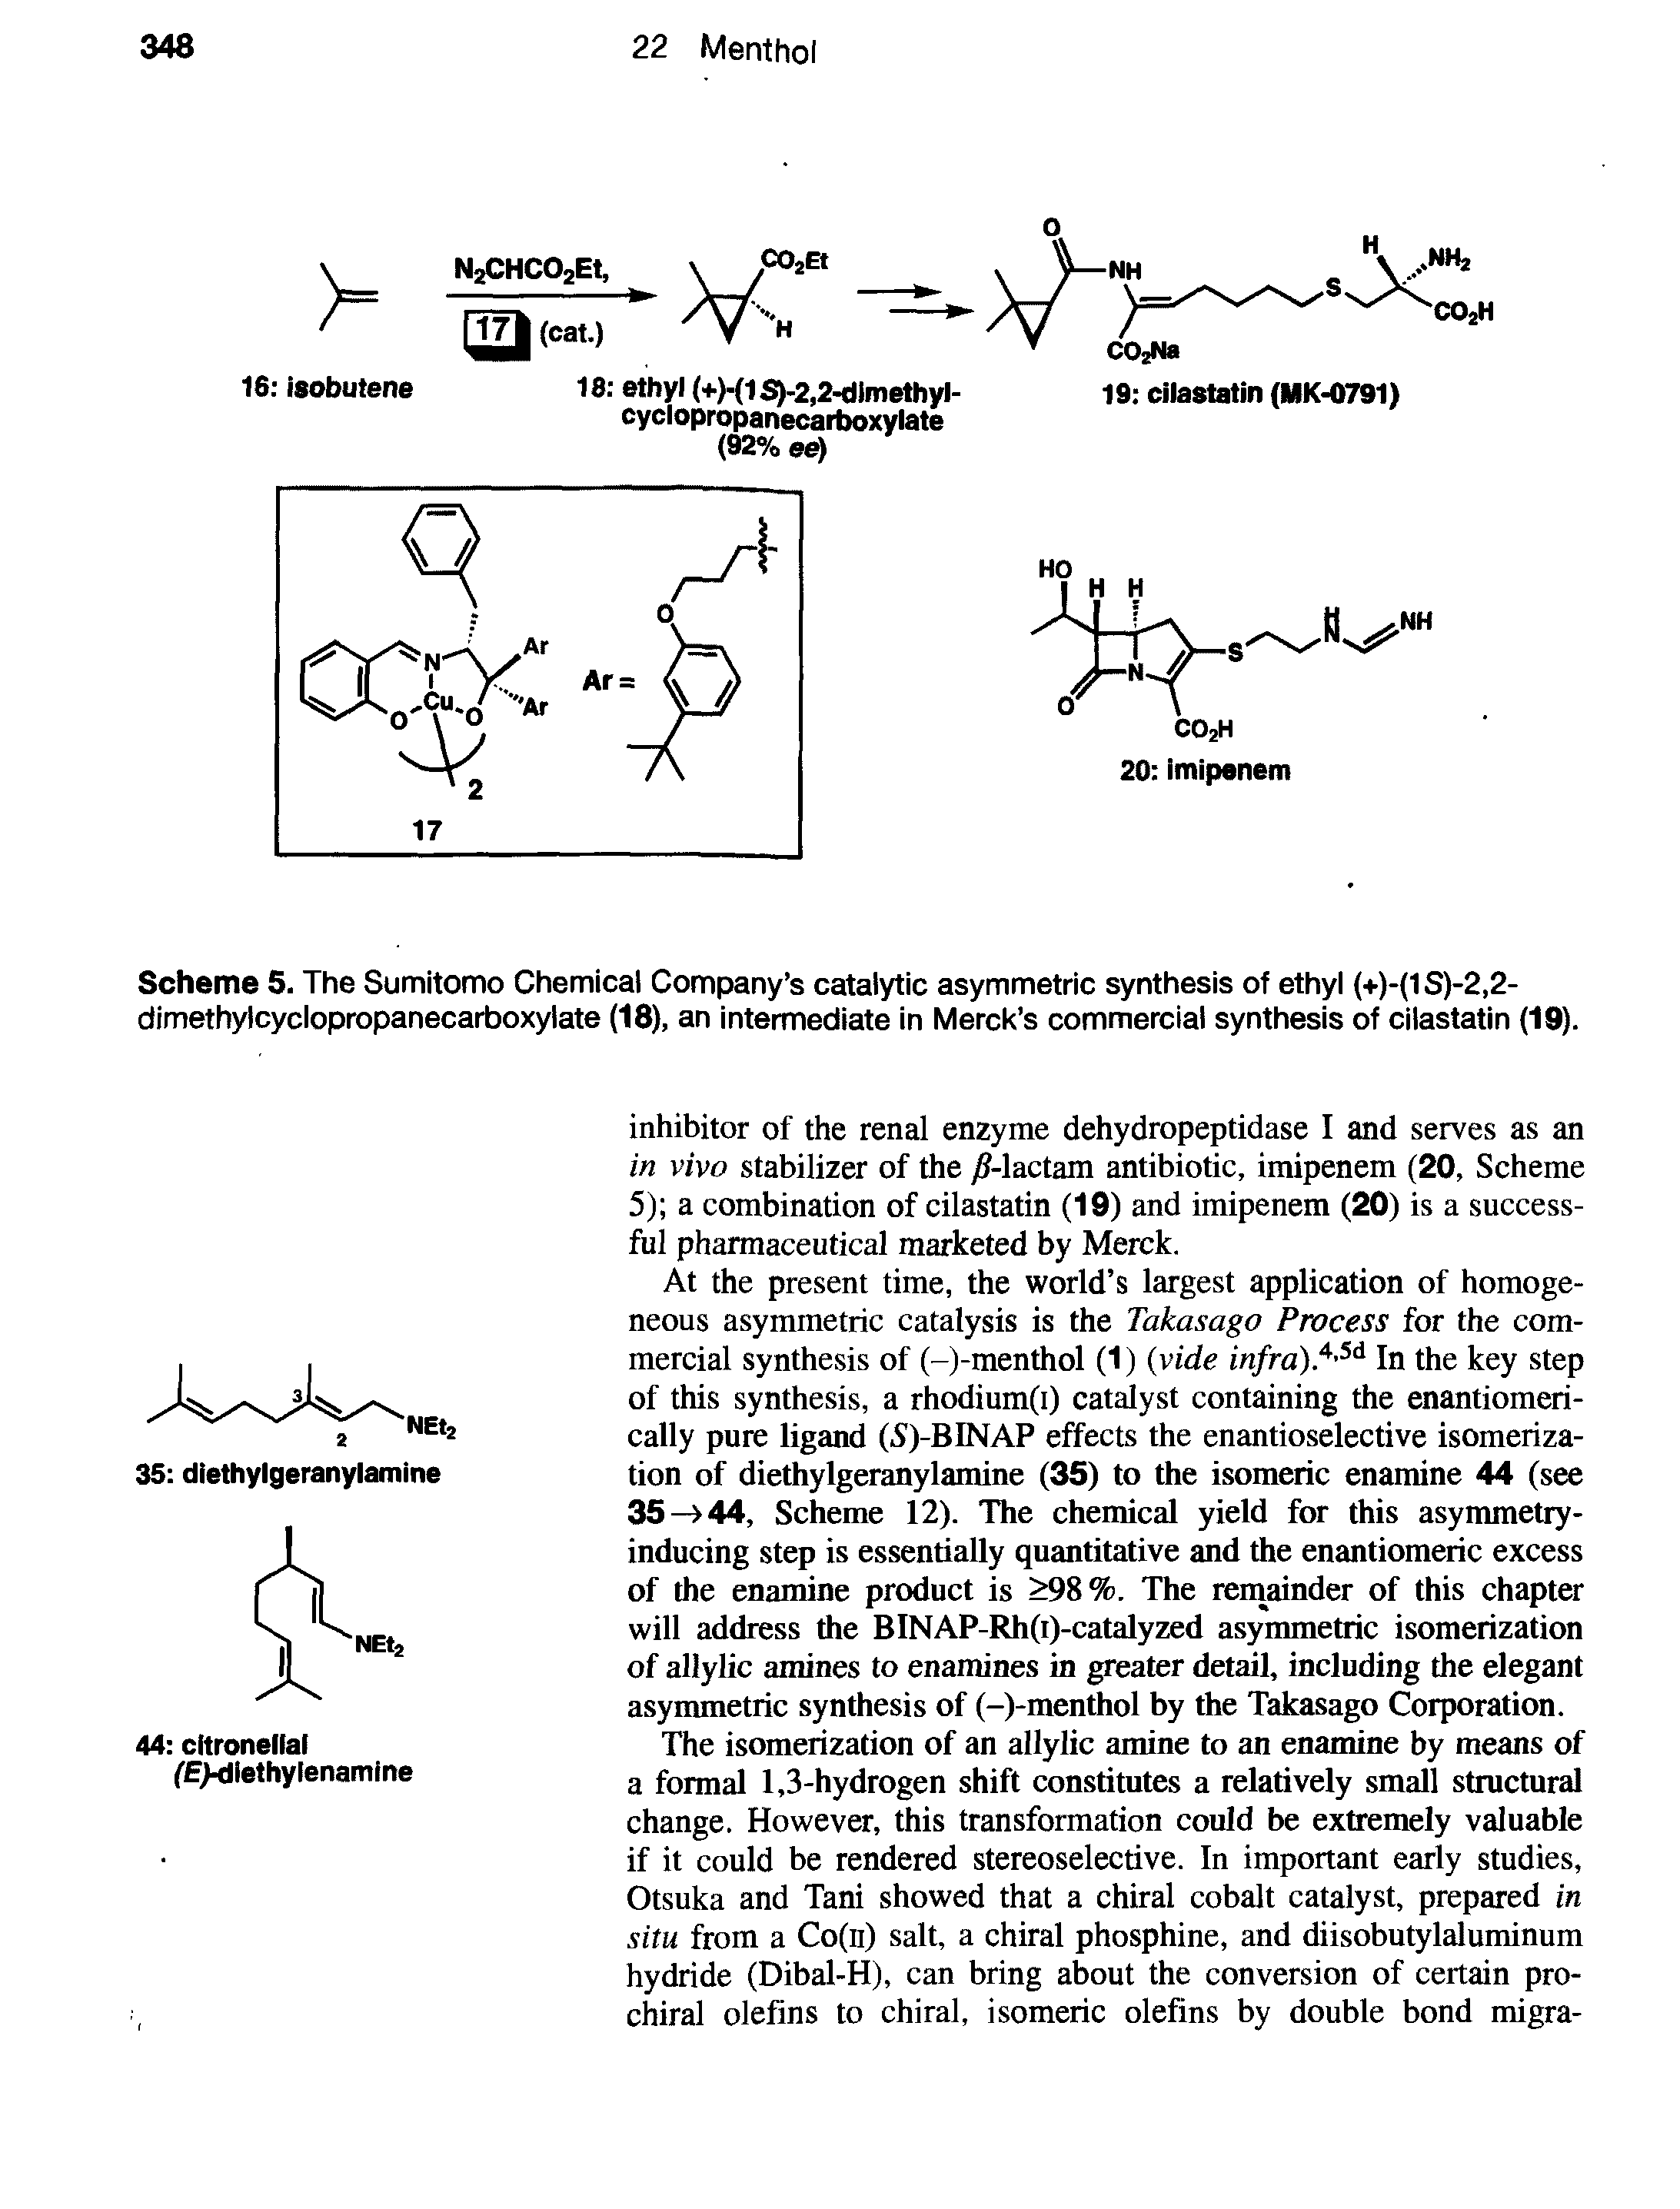 Scheme 5. The Sumitomo Chemical Company s catalytic asymmetric synthesis of ethyl (+)-(1 S)-2,2-dimethylcyclopropanecarboxylate (18), an intermediate in Merck s commercial synthesis of cilastatin (19).